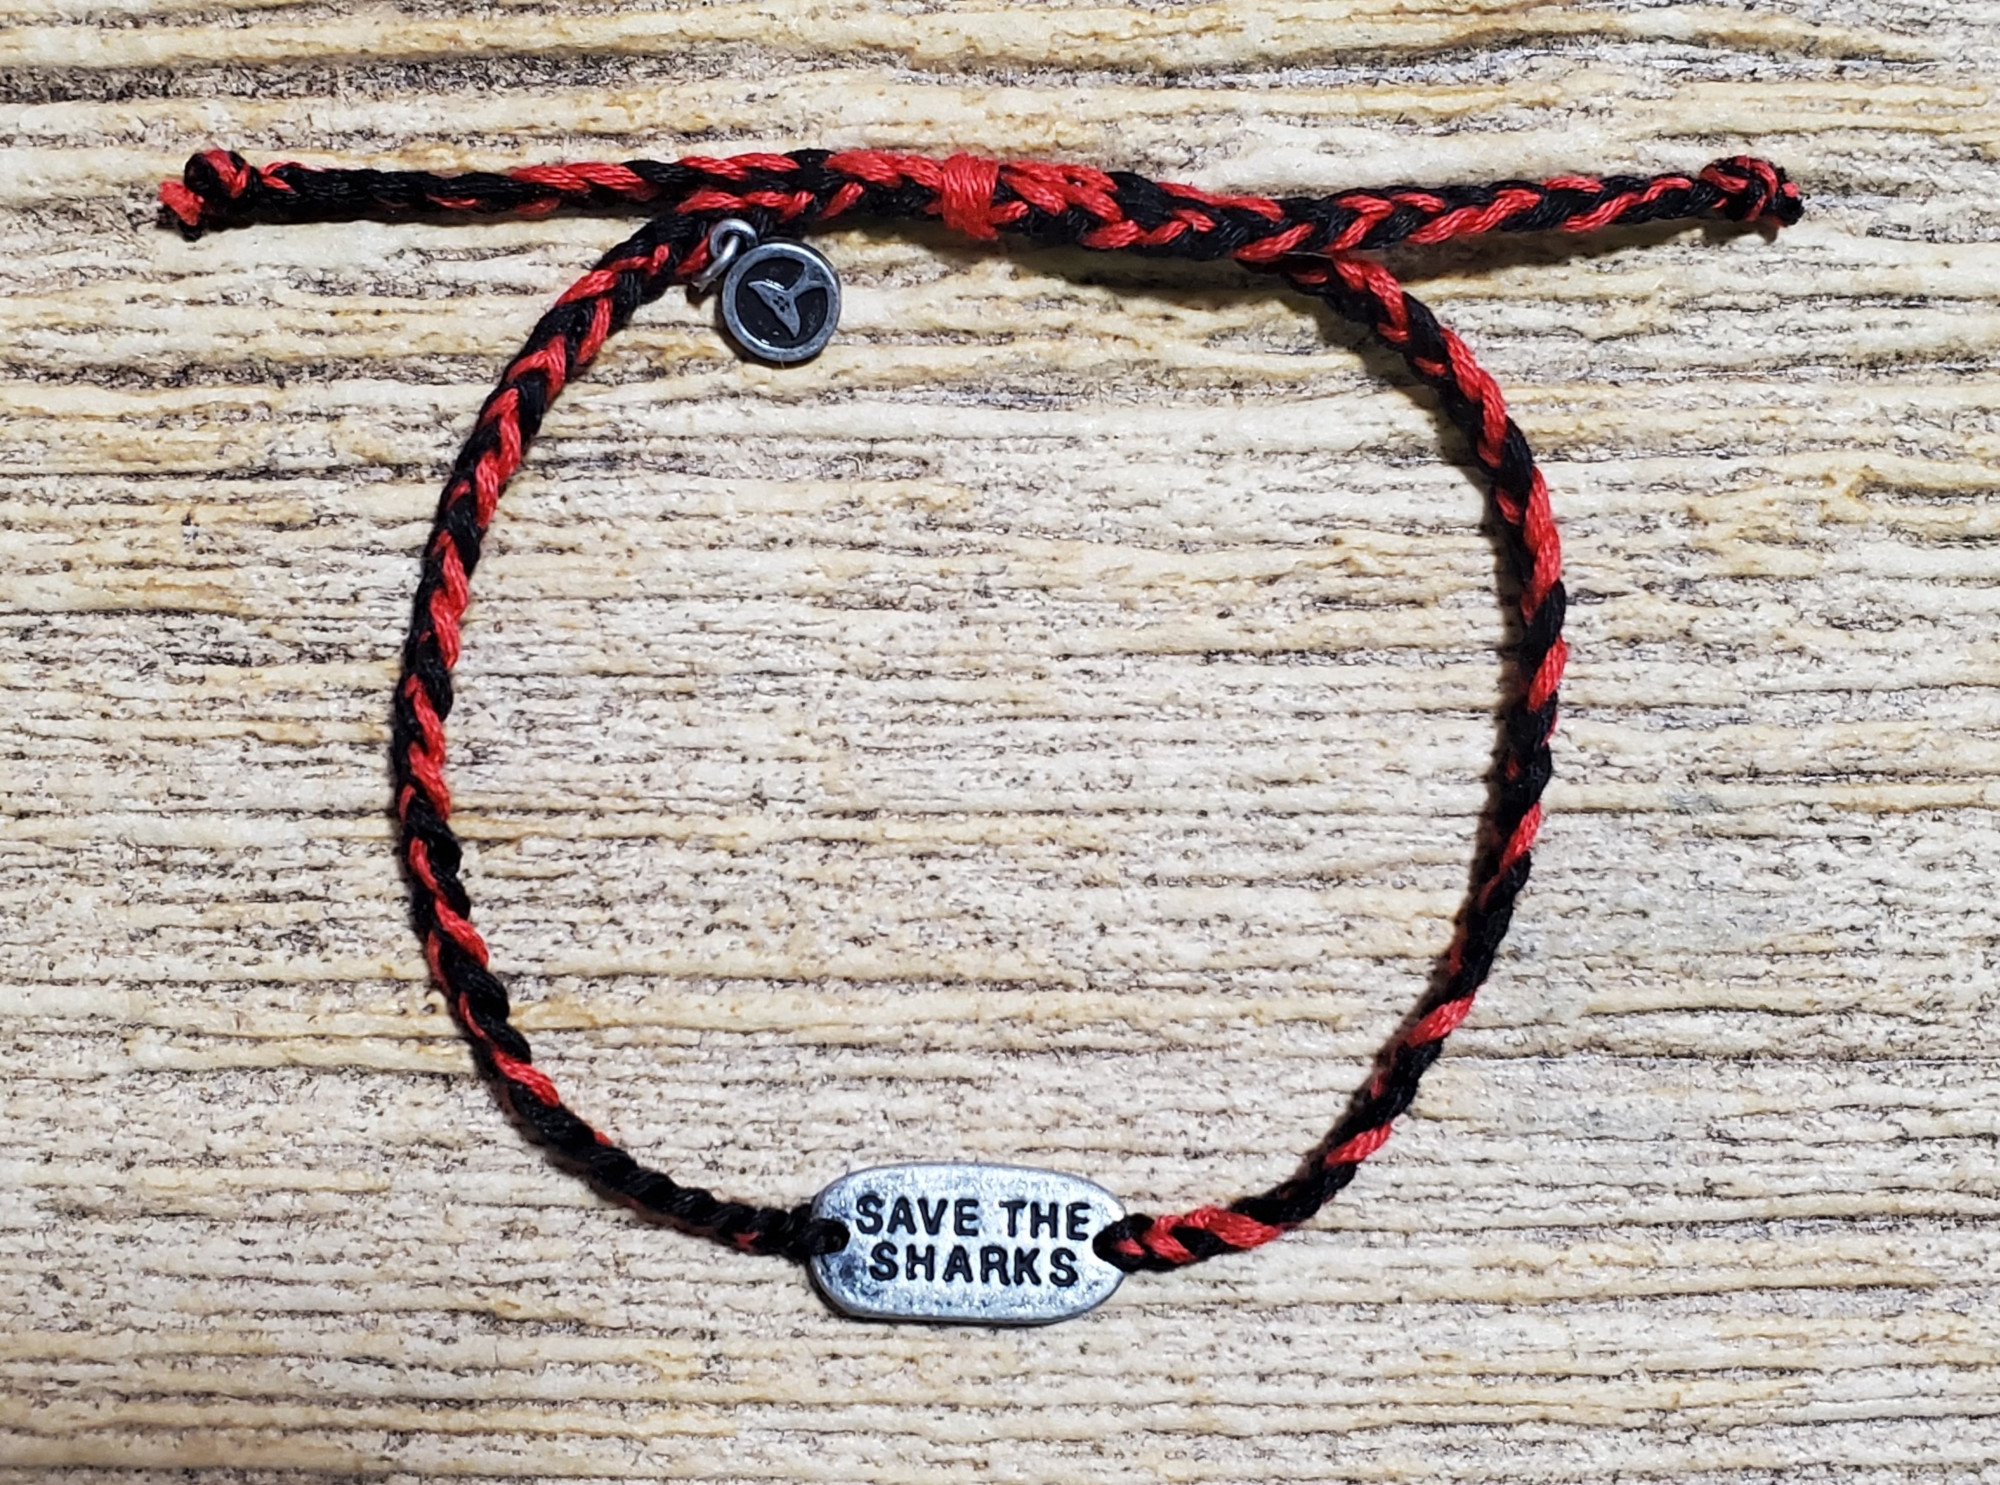 Save the Sharks Bracelet - Store - Marine Life Rescue Project™